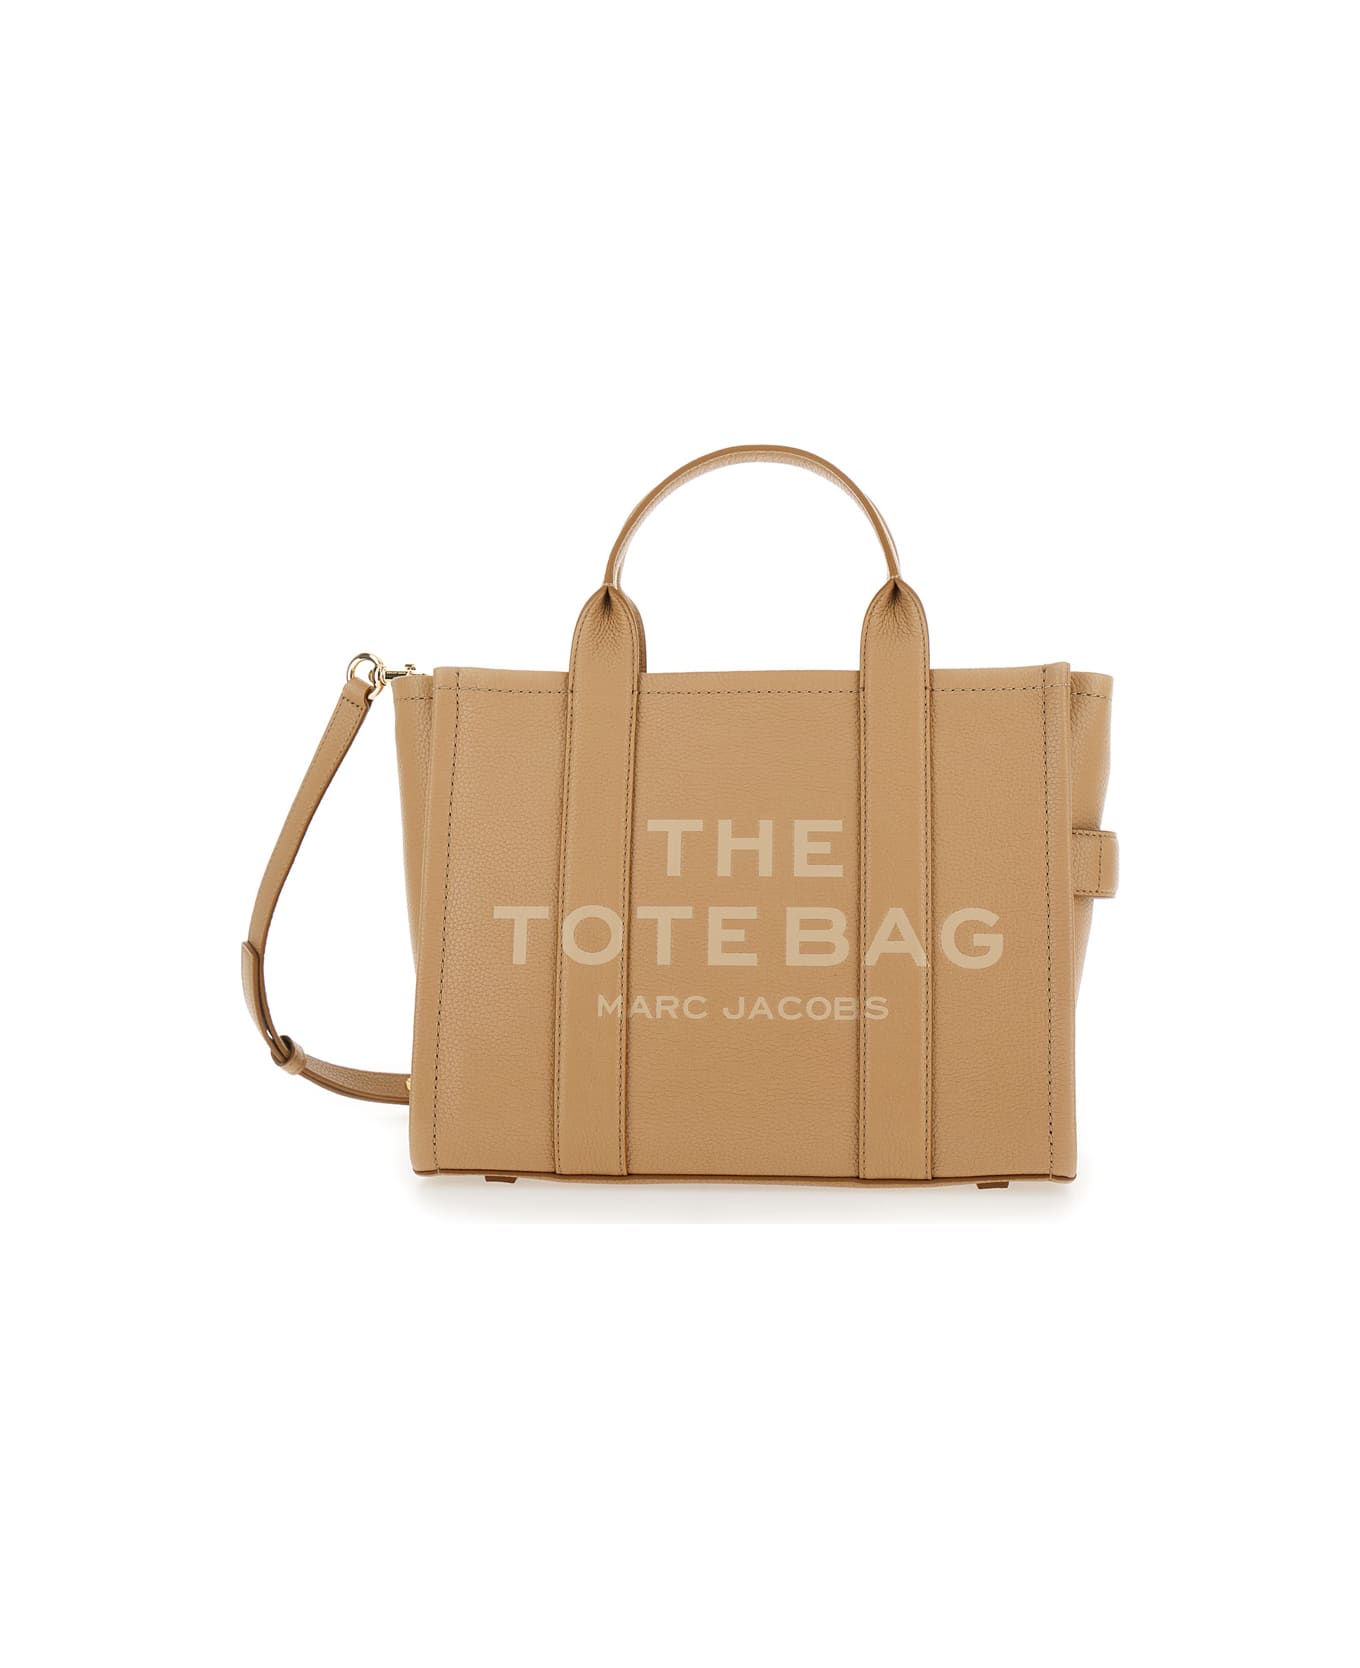 Marc Jacobs 'the Medium Tote Bag' Beige Shoulder Bag With Logo In Grainy Leather Woman - Beige